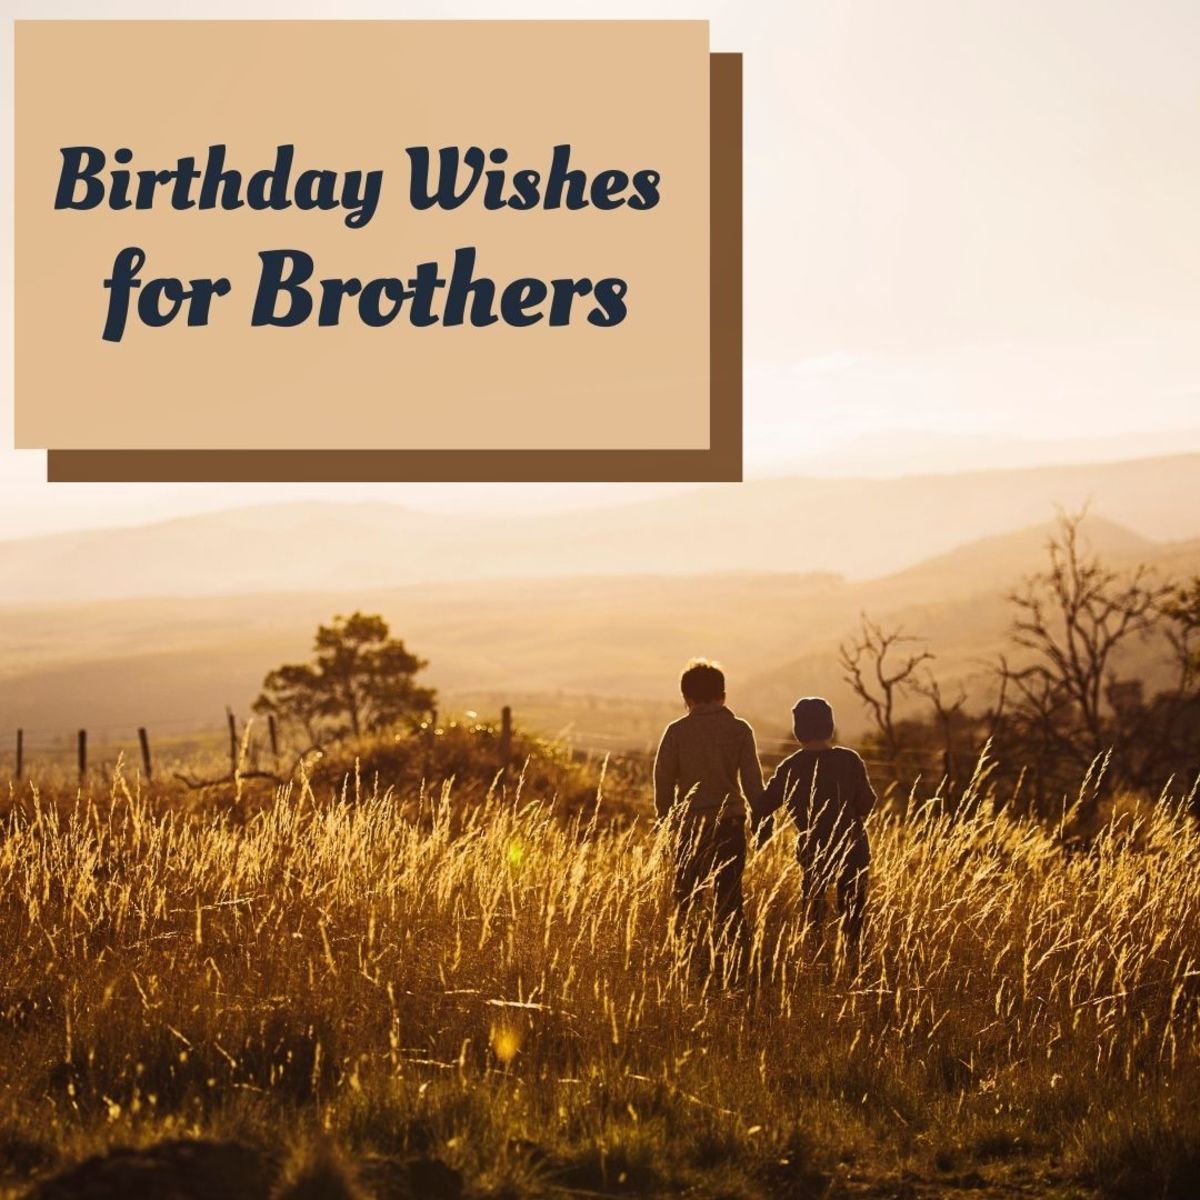 Show your brother how much you care about him by sending him a heartfelt message on his birthday.